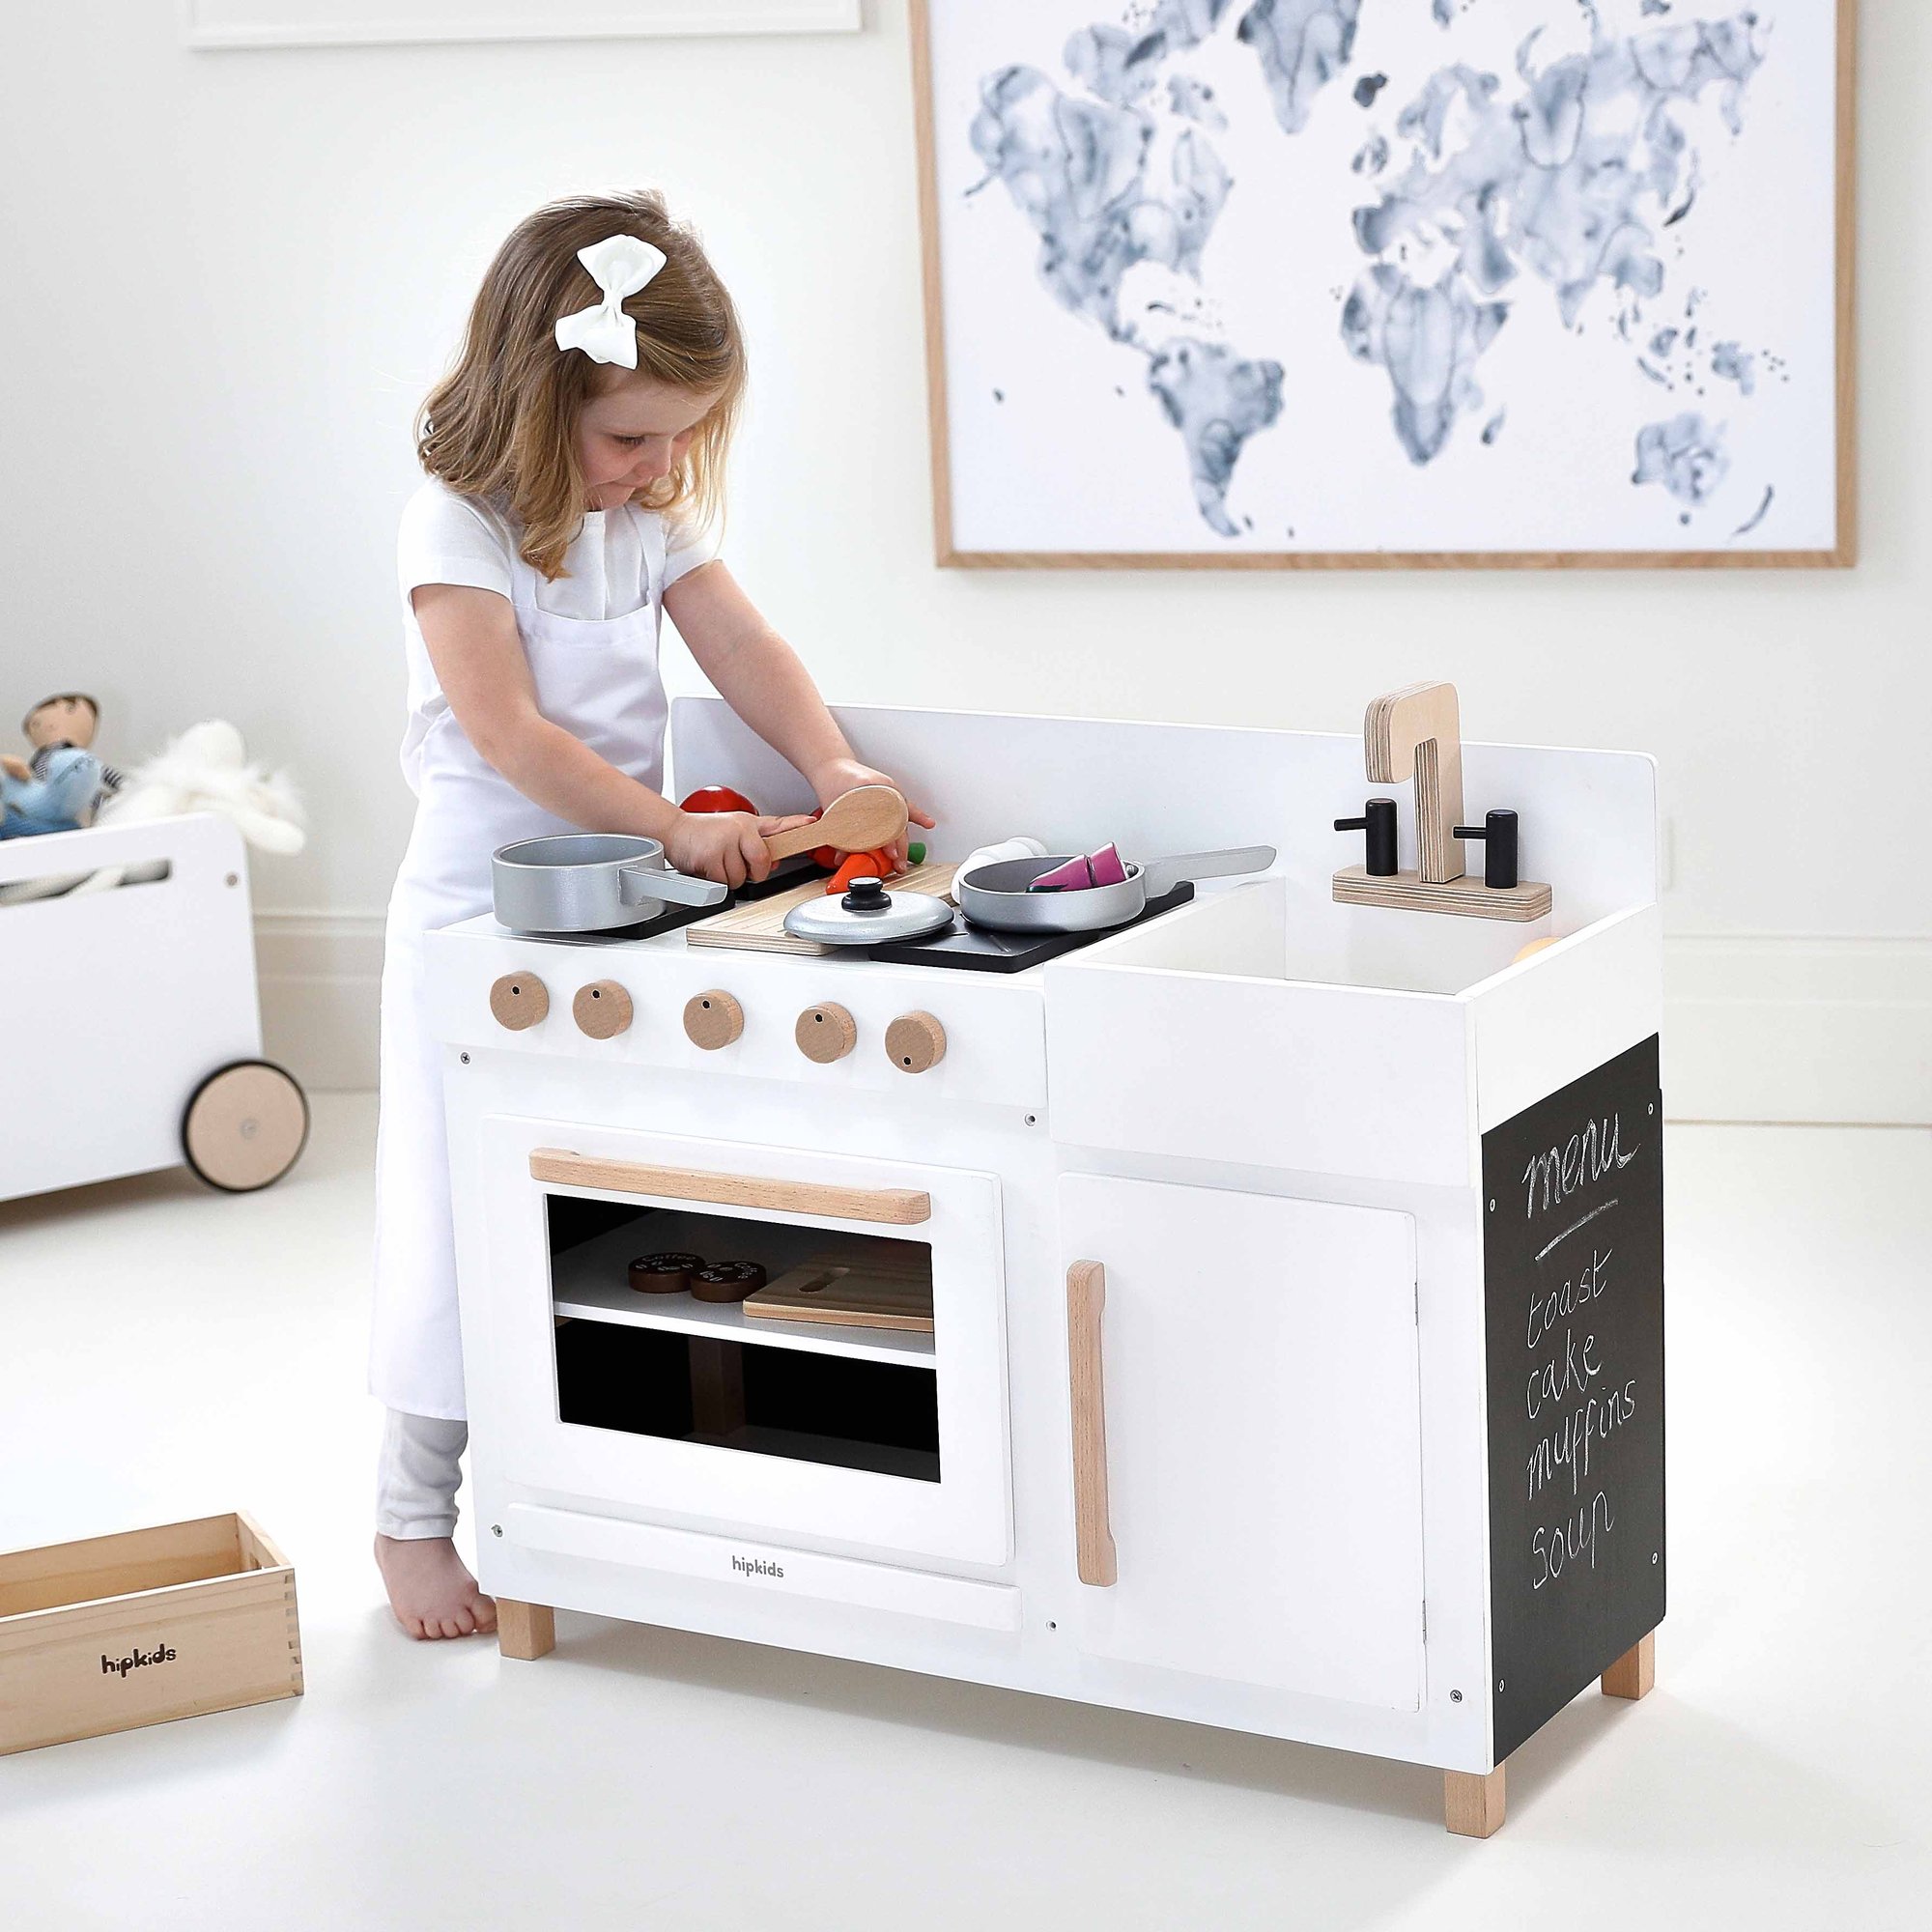 The 6 Best Play Kitchens For Children 2020 From Subtle Wooden Styles To The Wipe Clean Plastic Classics